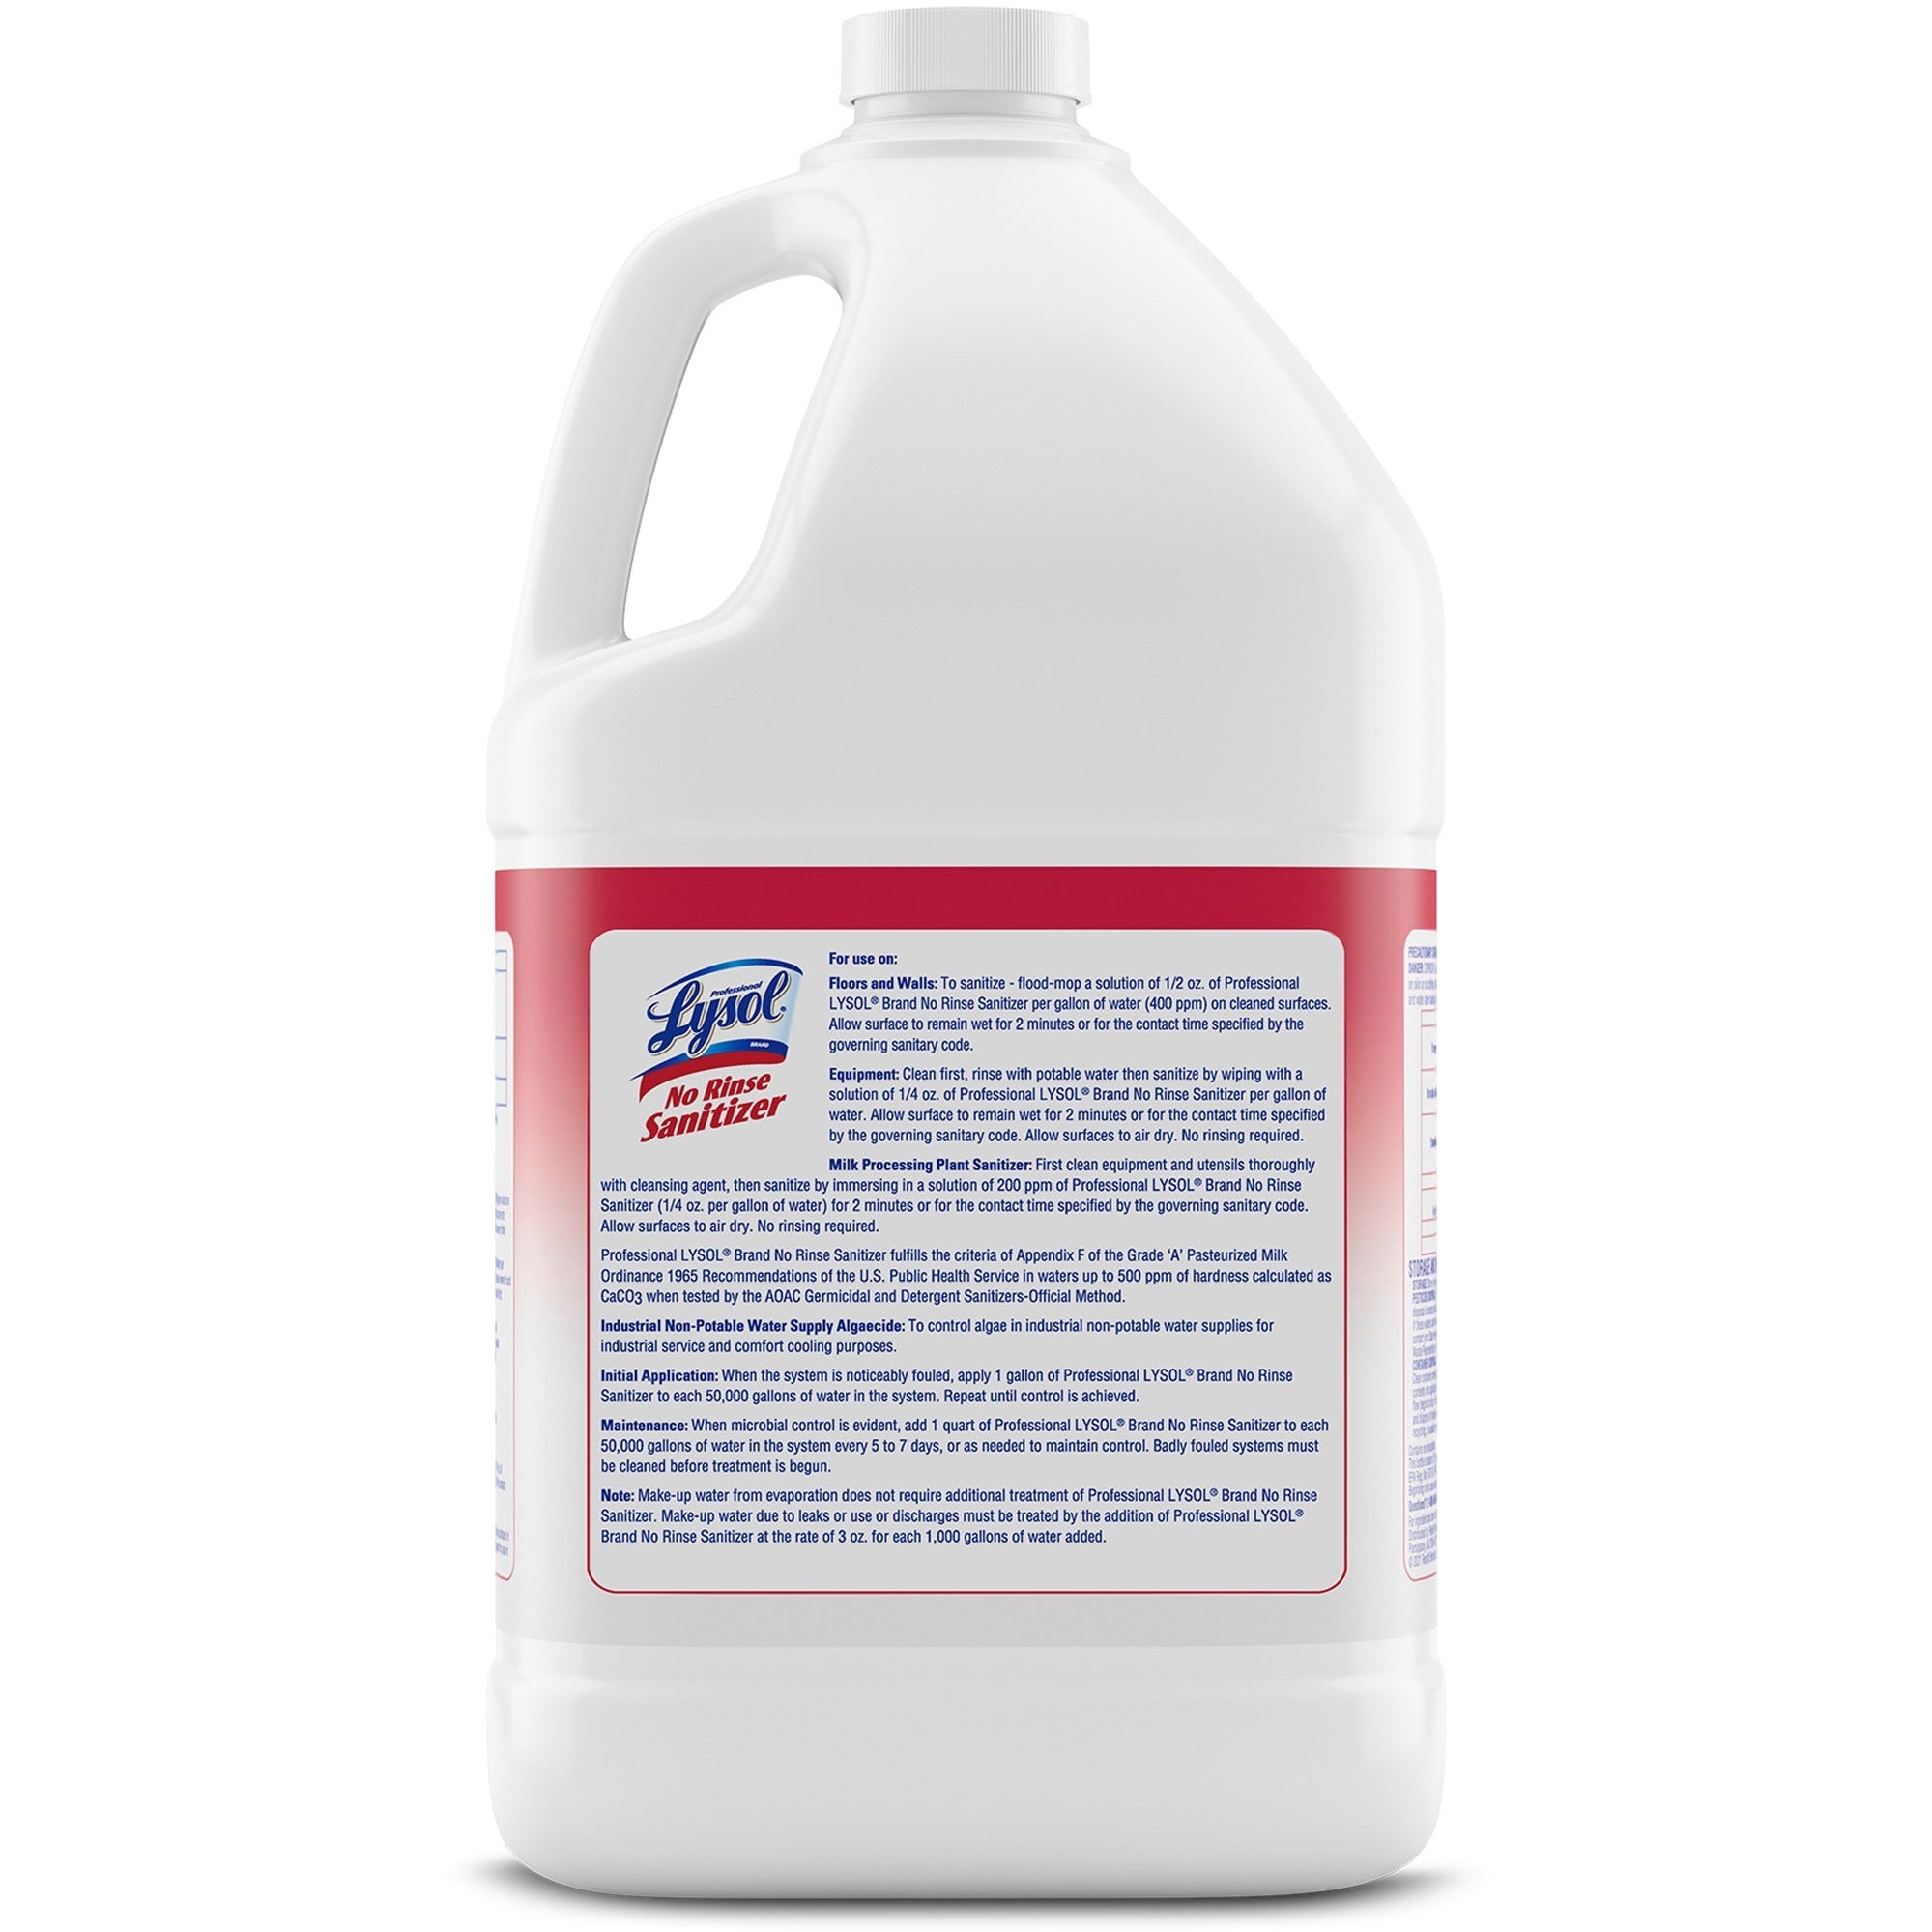 professional-lysol-no-rinse-sanitizer-for-sink-floor-wall-bathtub-food-service-area-concentrate-128-fl-oz-4-quart-4-carton-disinfectant-anti-bacterial_rac74389ct - 3